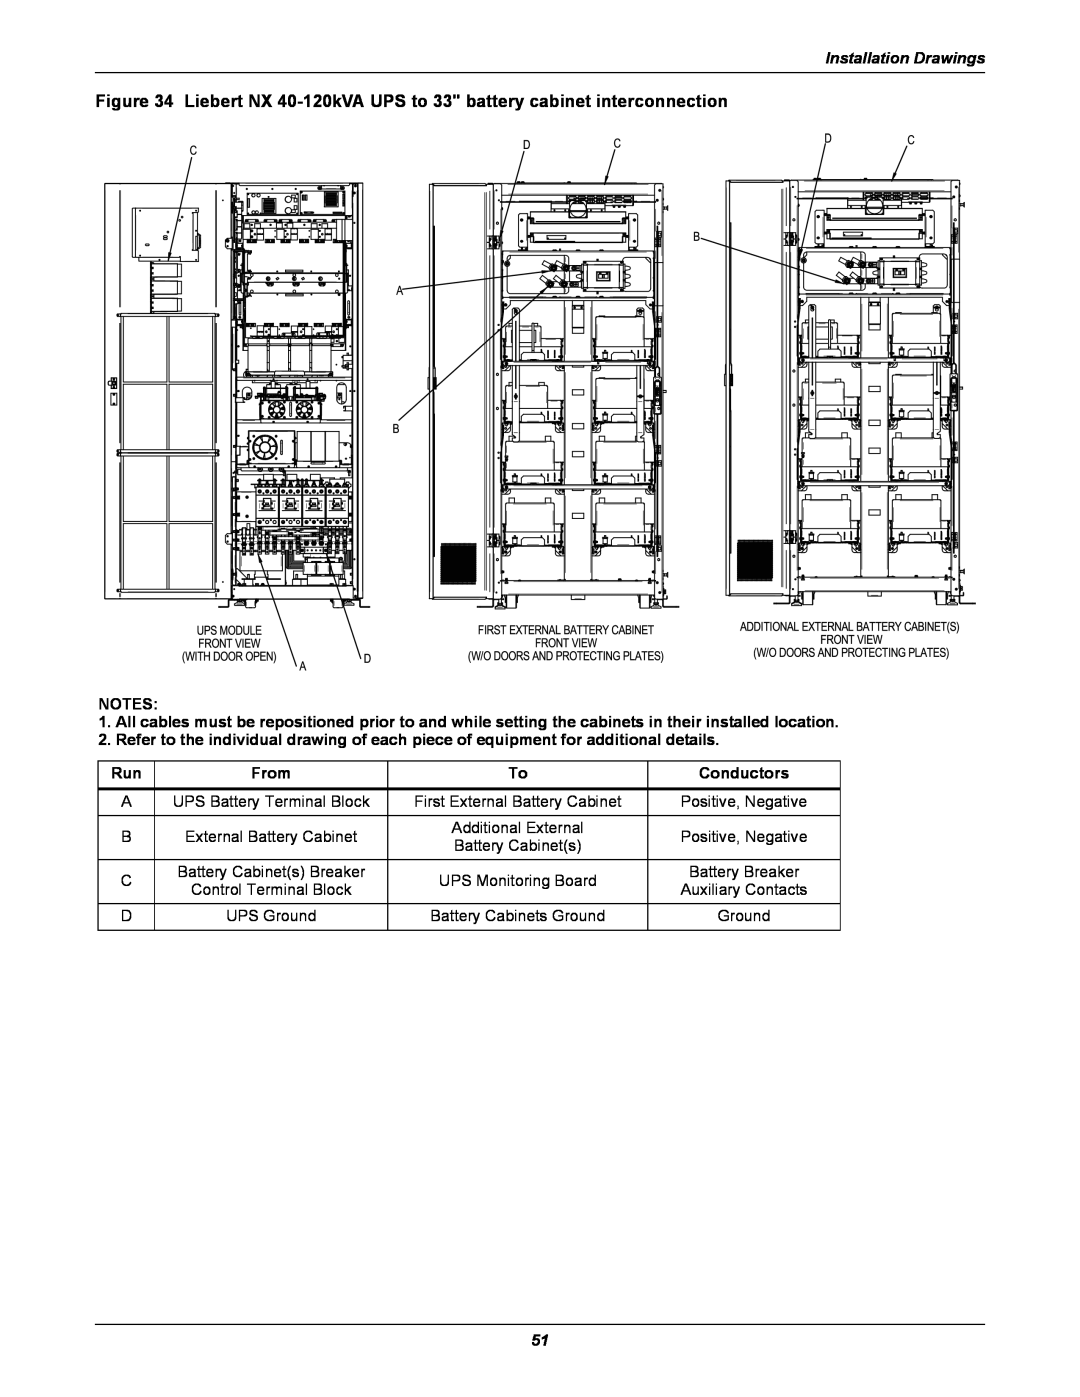 Emerson 480V, 60HZ user manual Installation Drawings, External Battery Cabinet, Battery Breaker, Auxiliary Contacts 